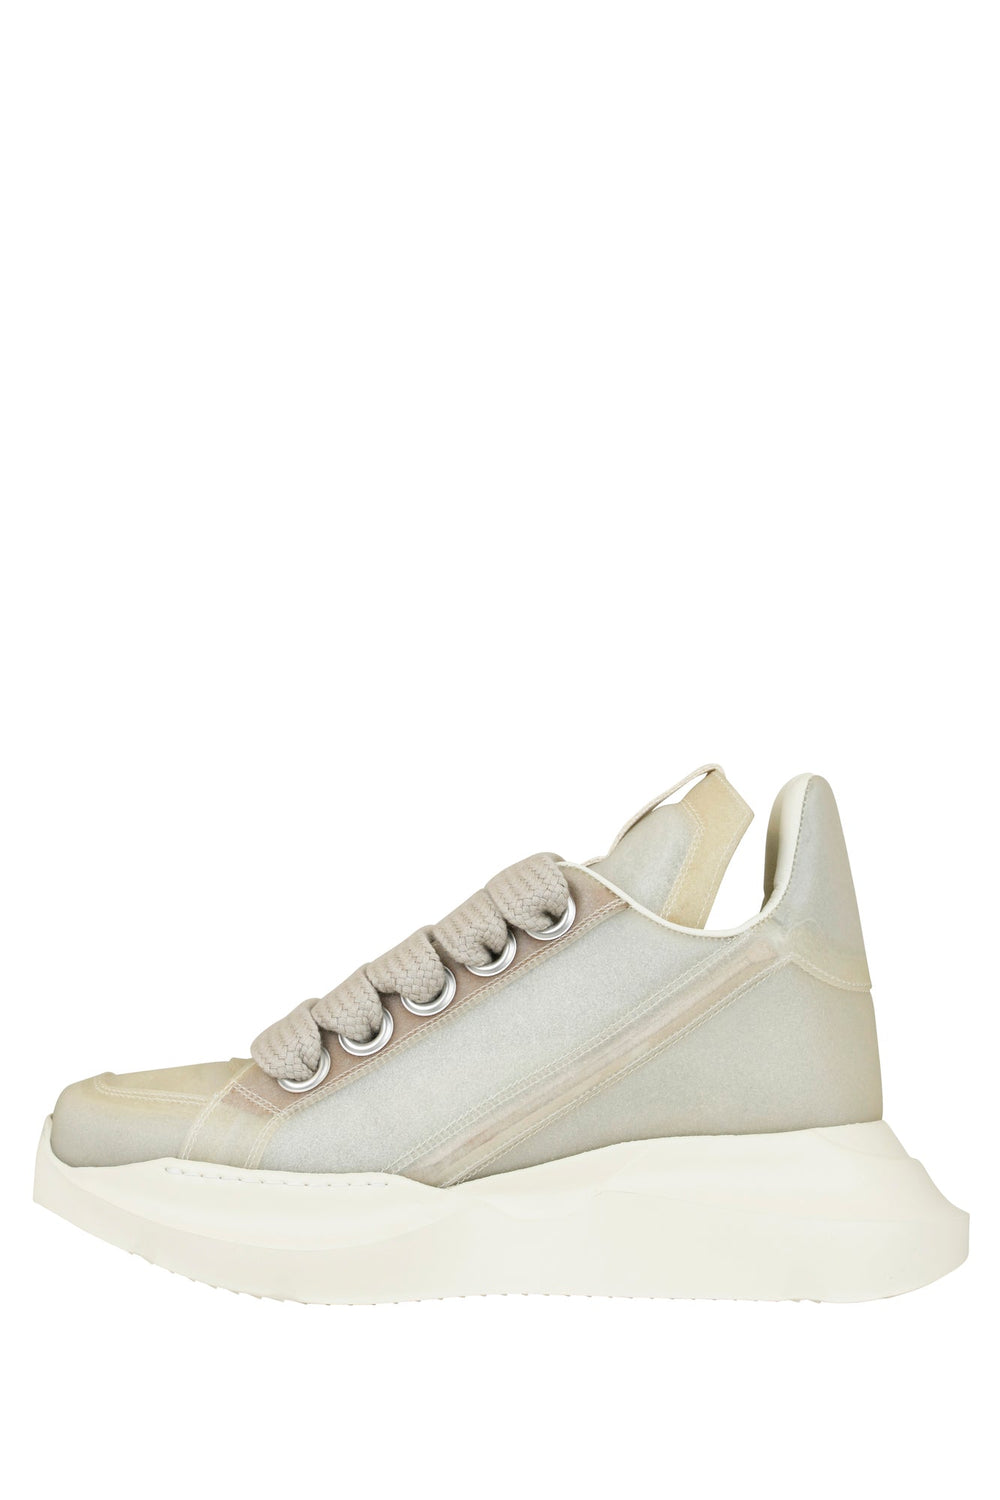 Rick Owens SS23 Mens Geth Runner – Antidote Fashion and Lifestyle